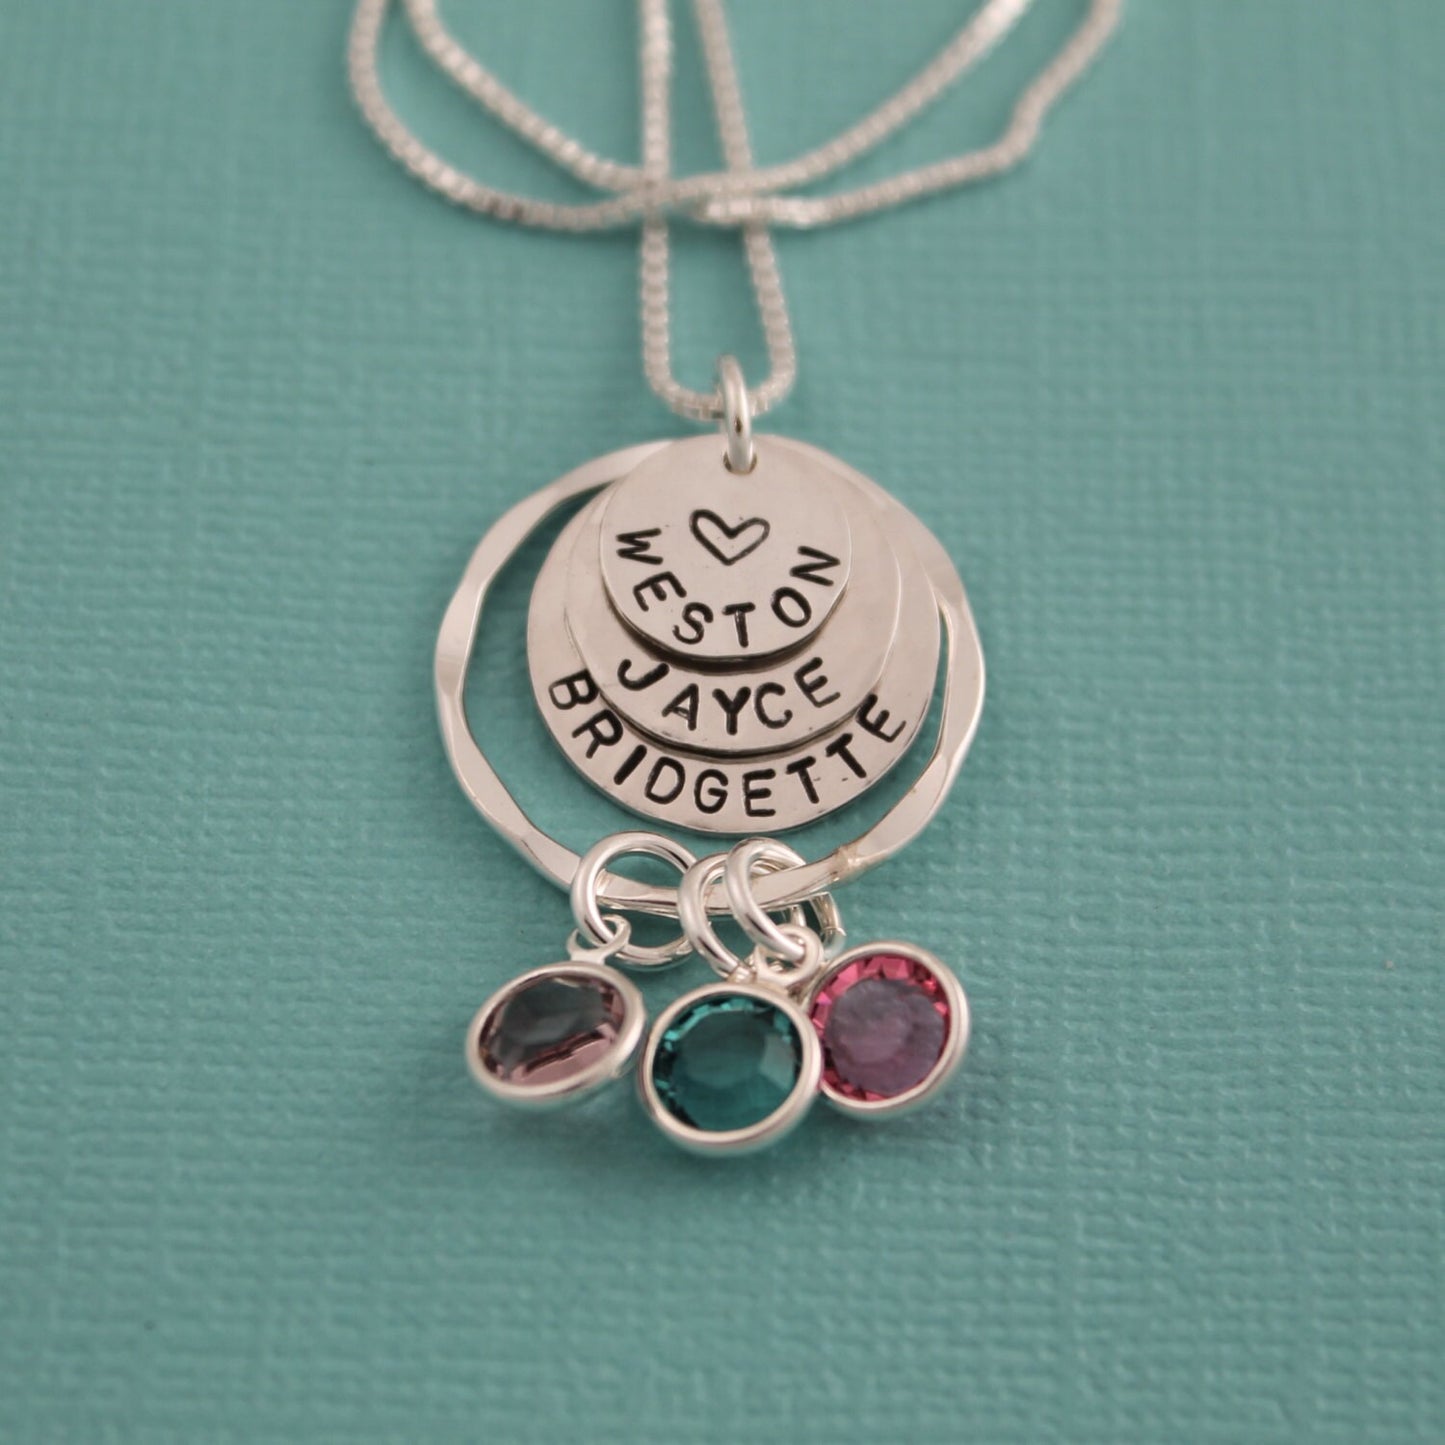 Grandmother Layered Sterling Silver Necklace Personalized Hand Stamped Jewelry